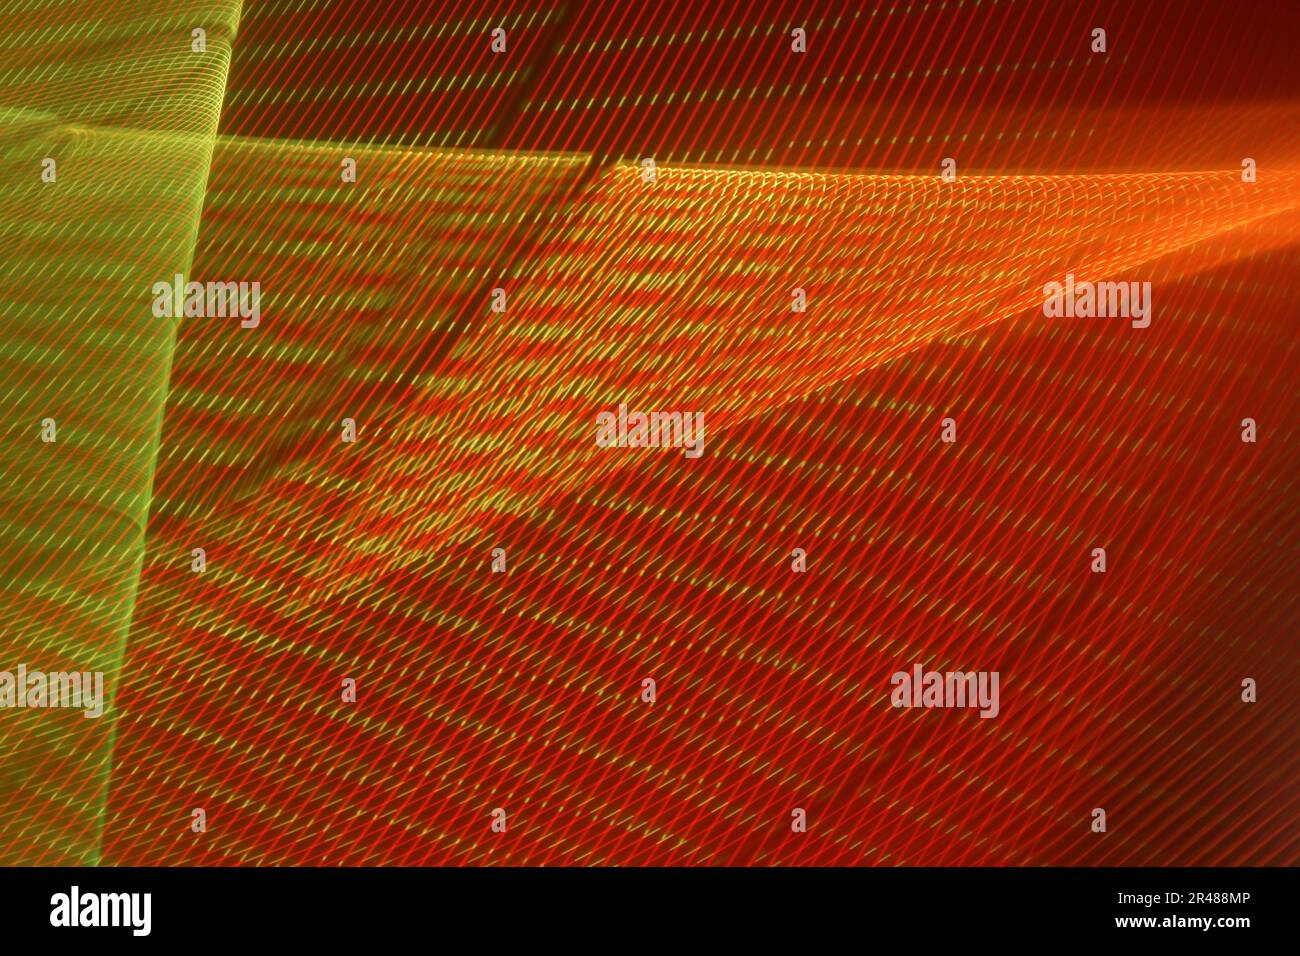 A large display featuring a pattern of red lights radiating outward along distinct lines Stock Photo